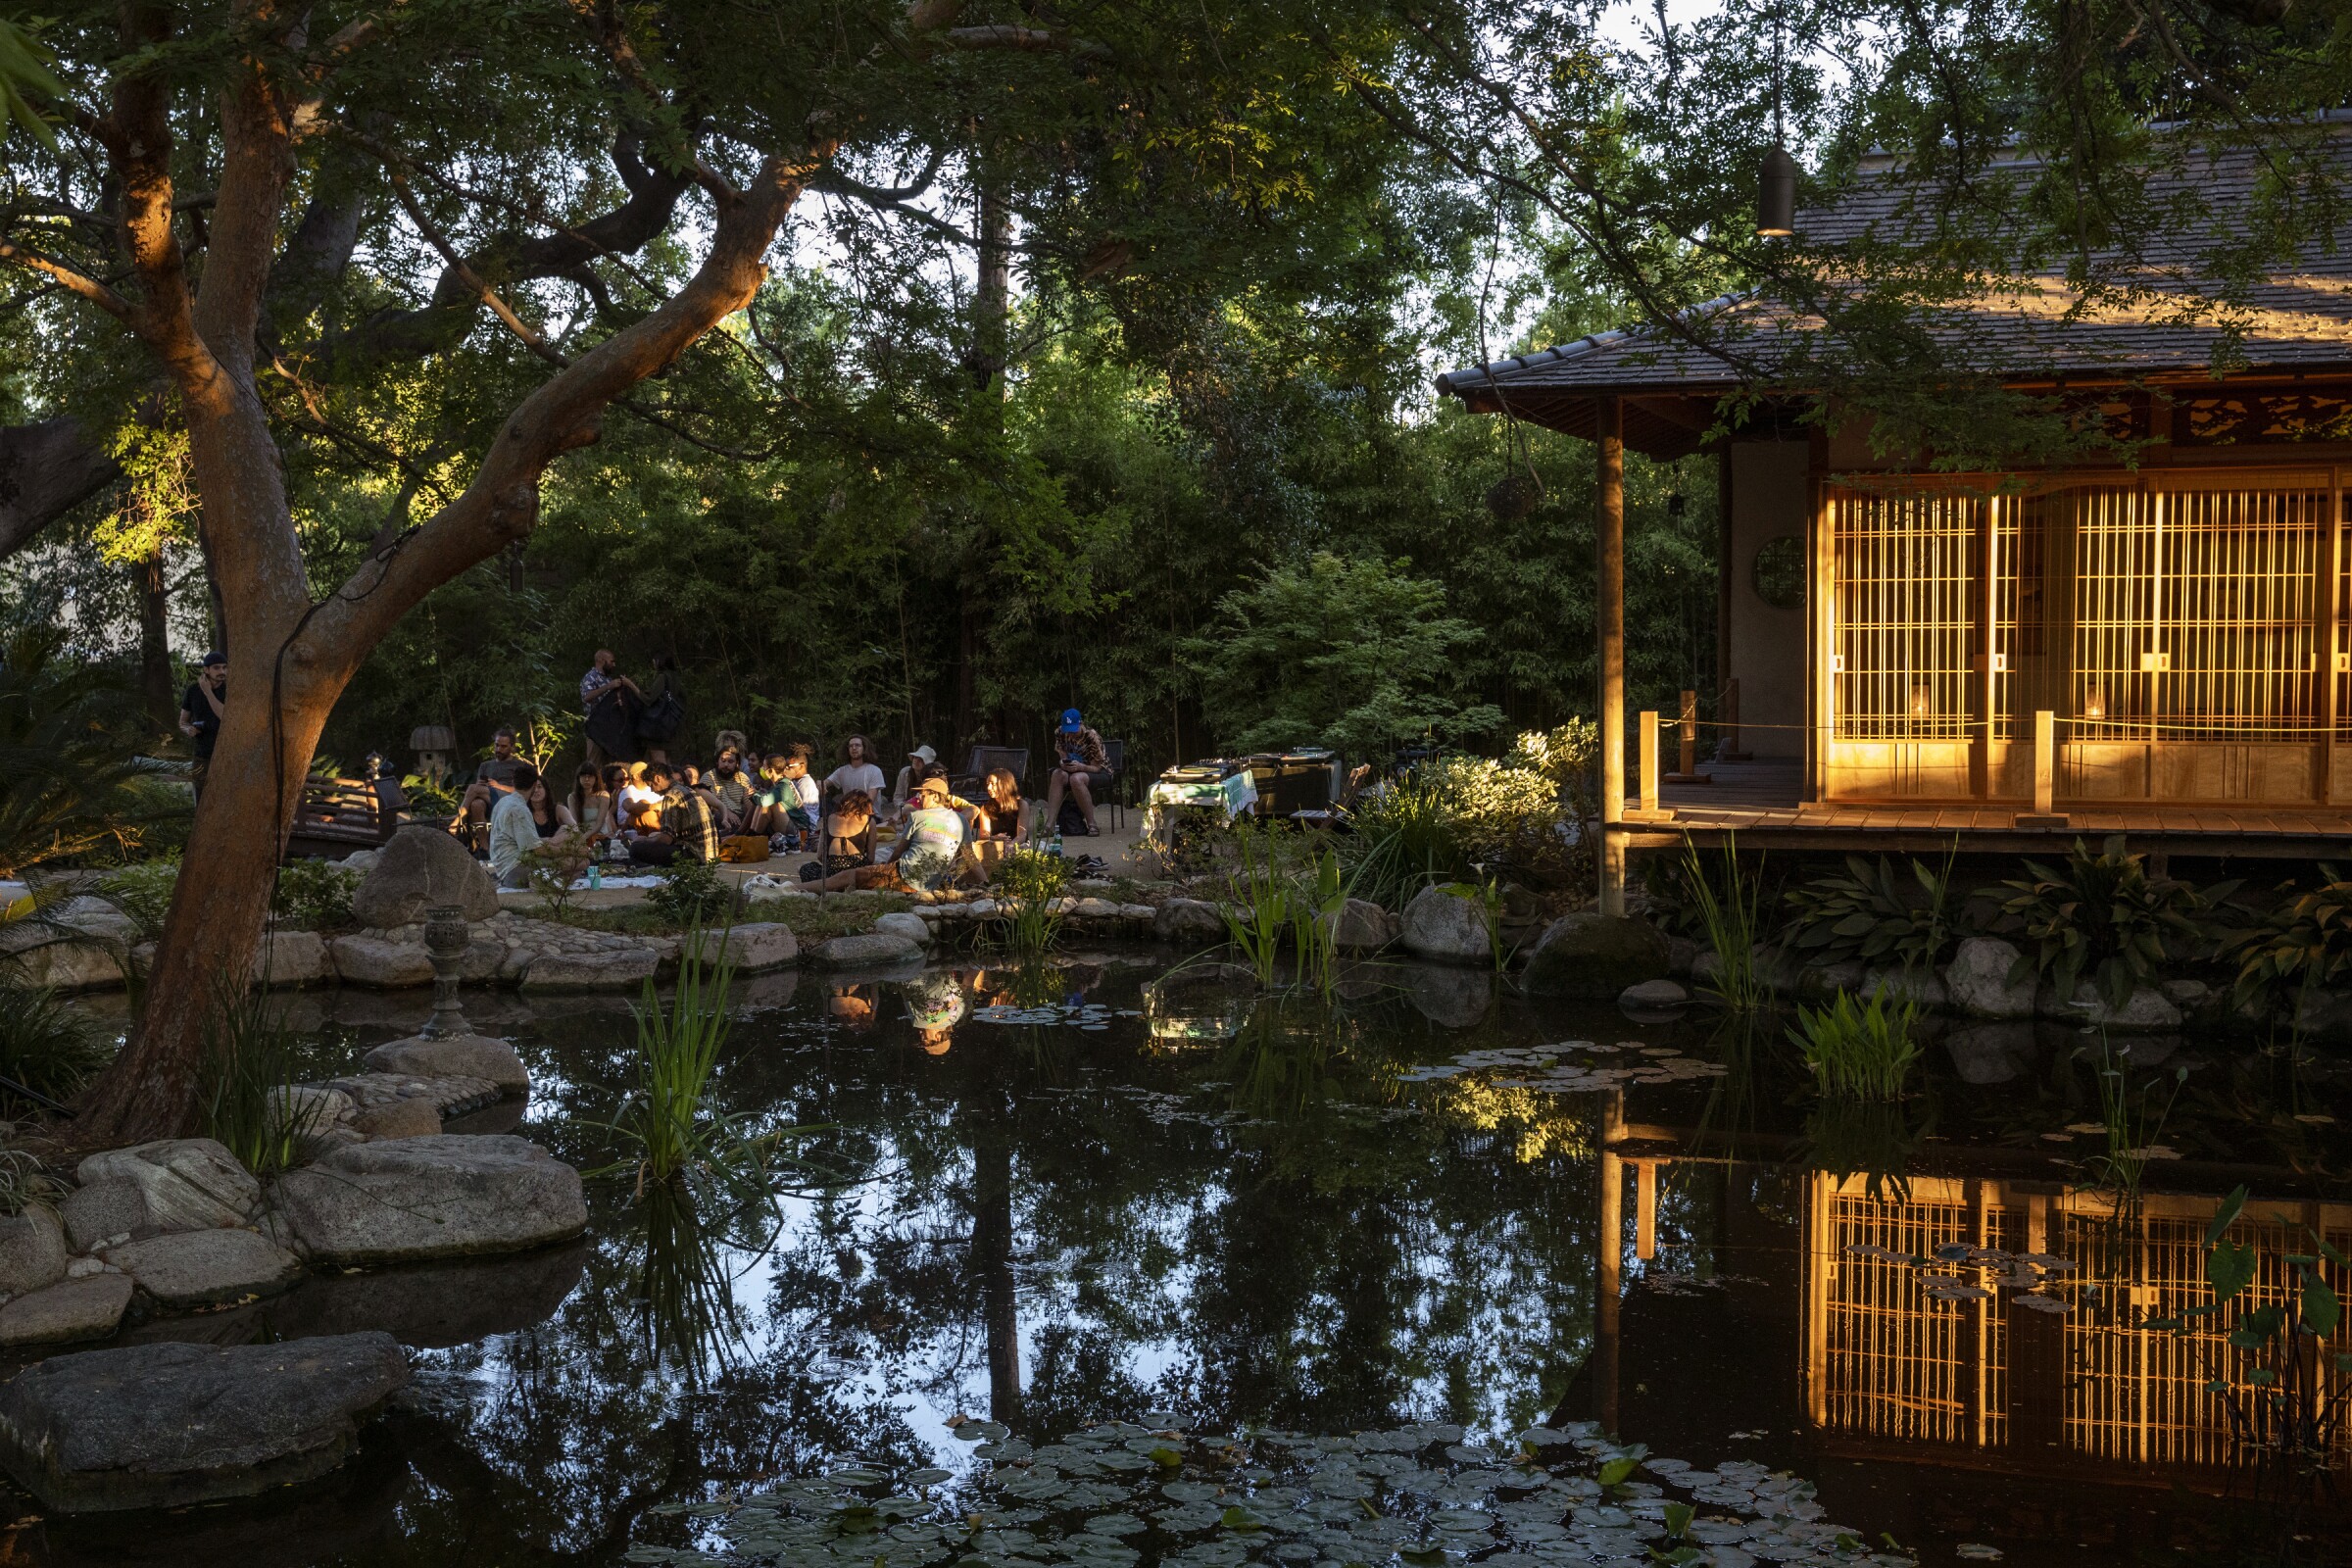 People sitting in a Japanese garden